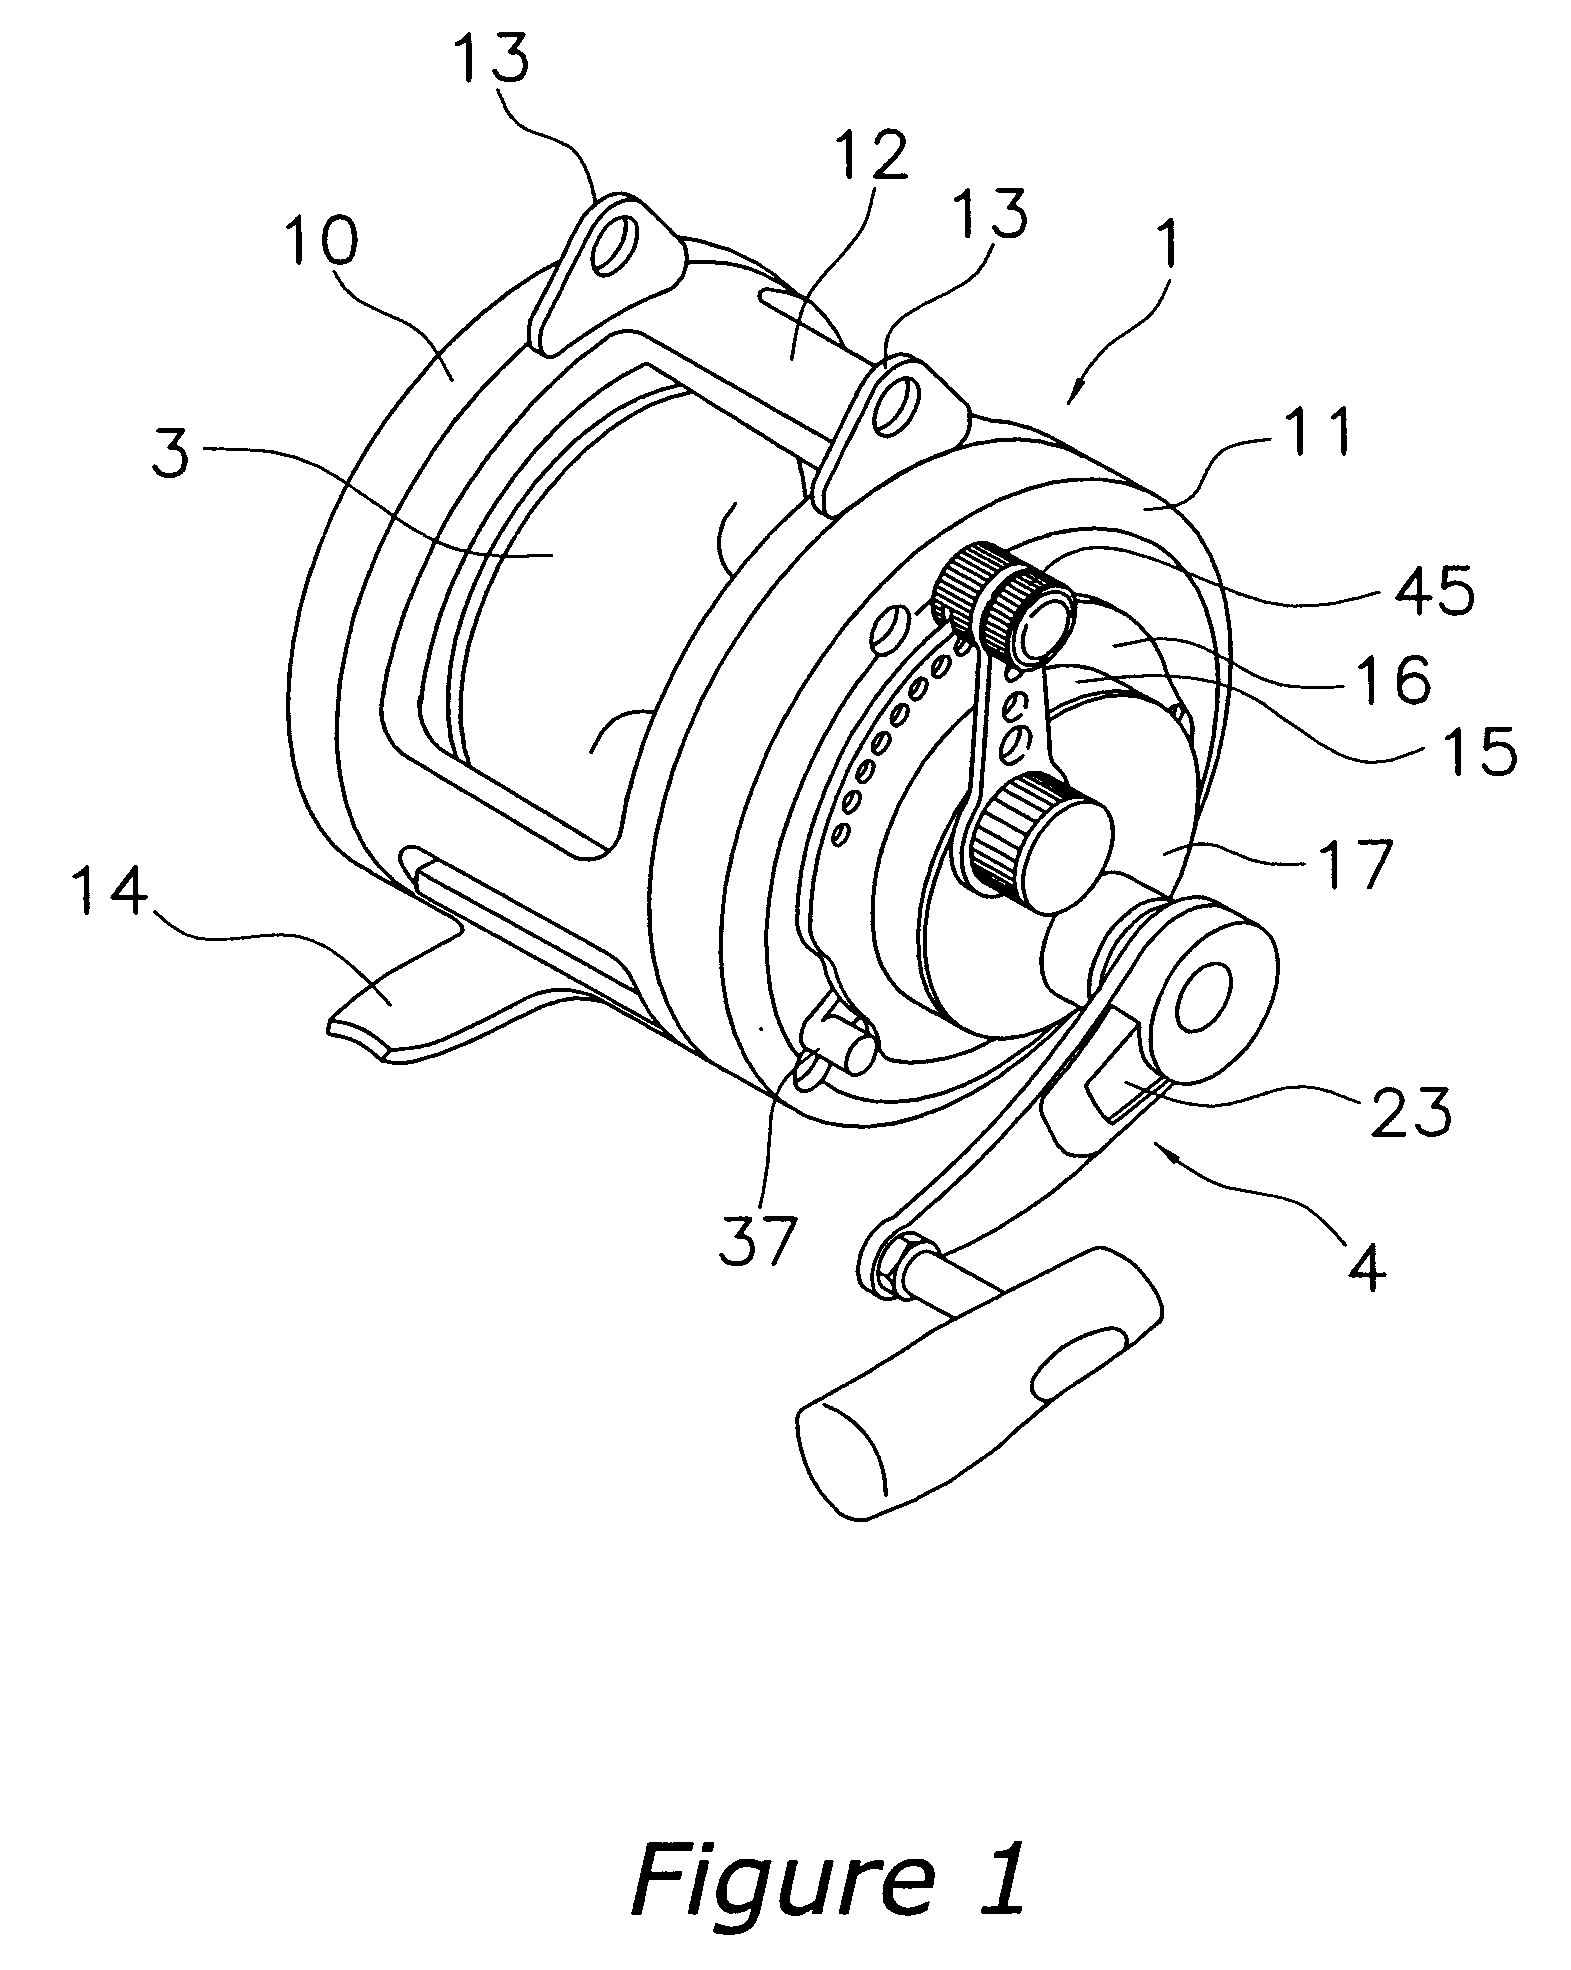 Drag adjustment device for a dual-bearing reel